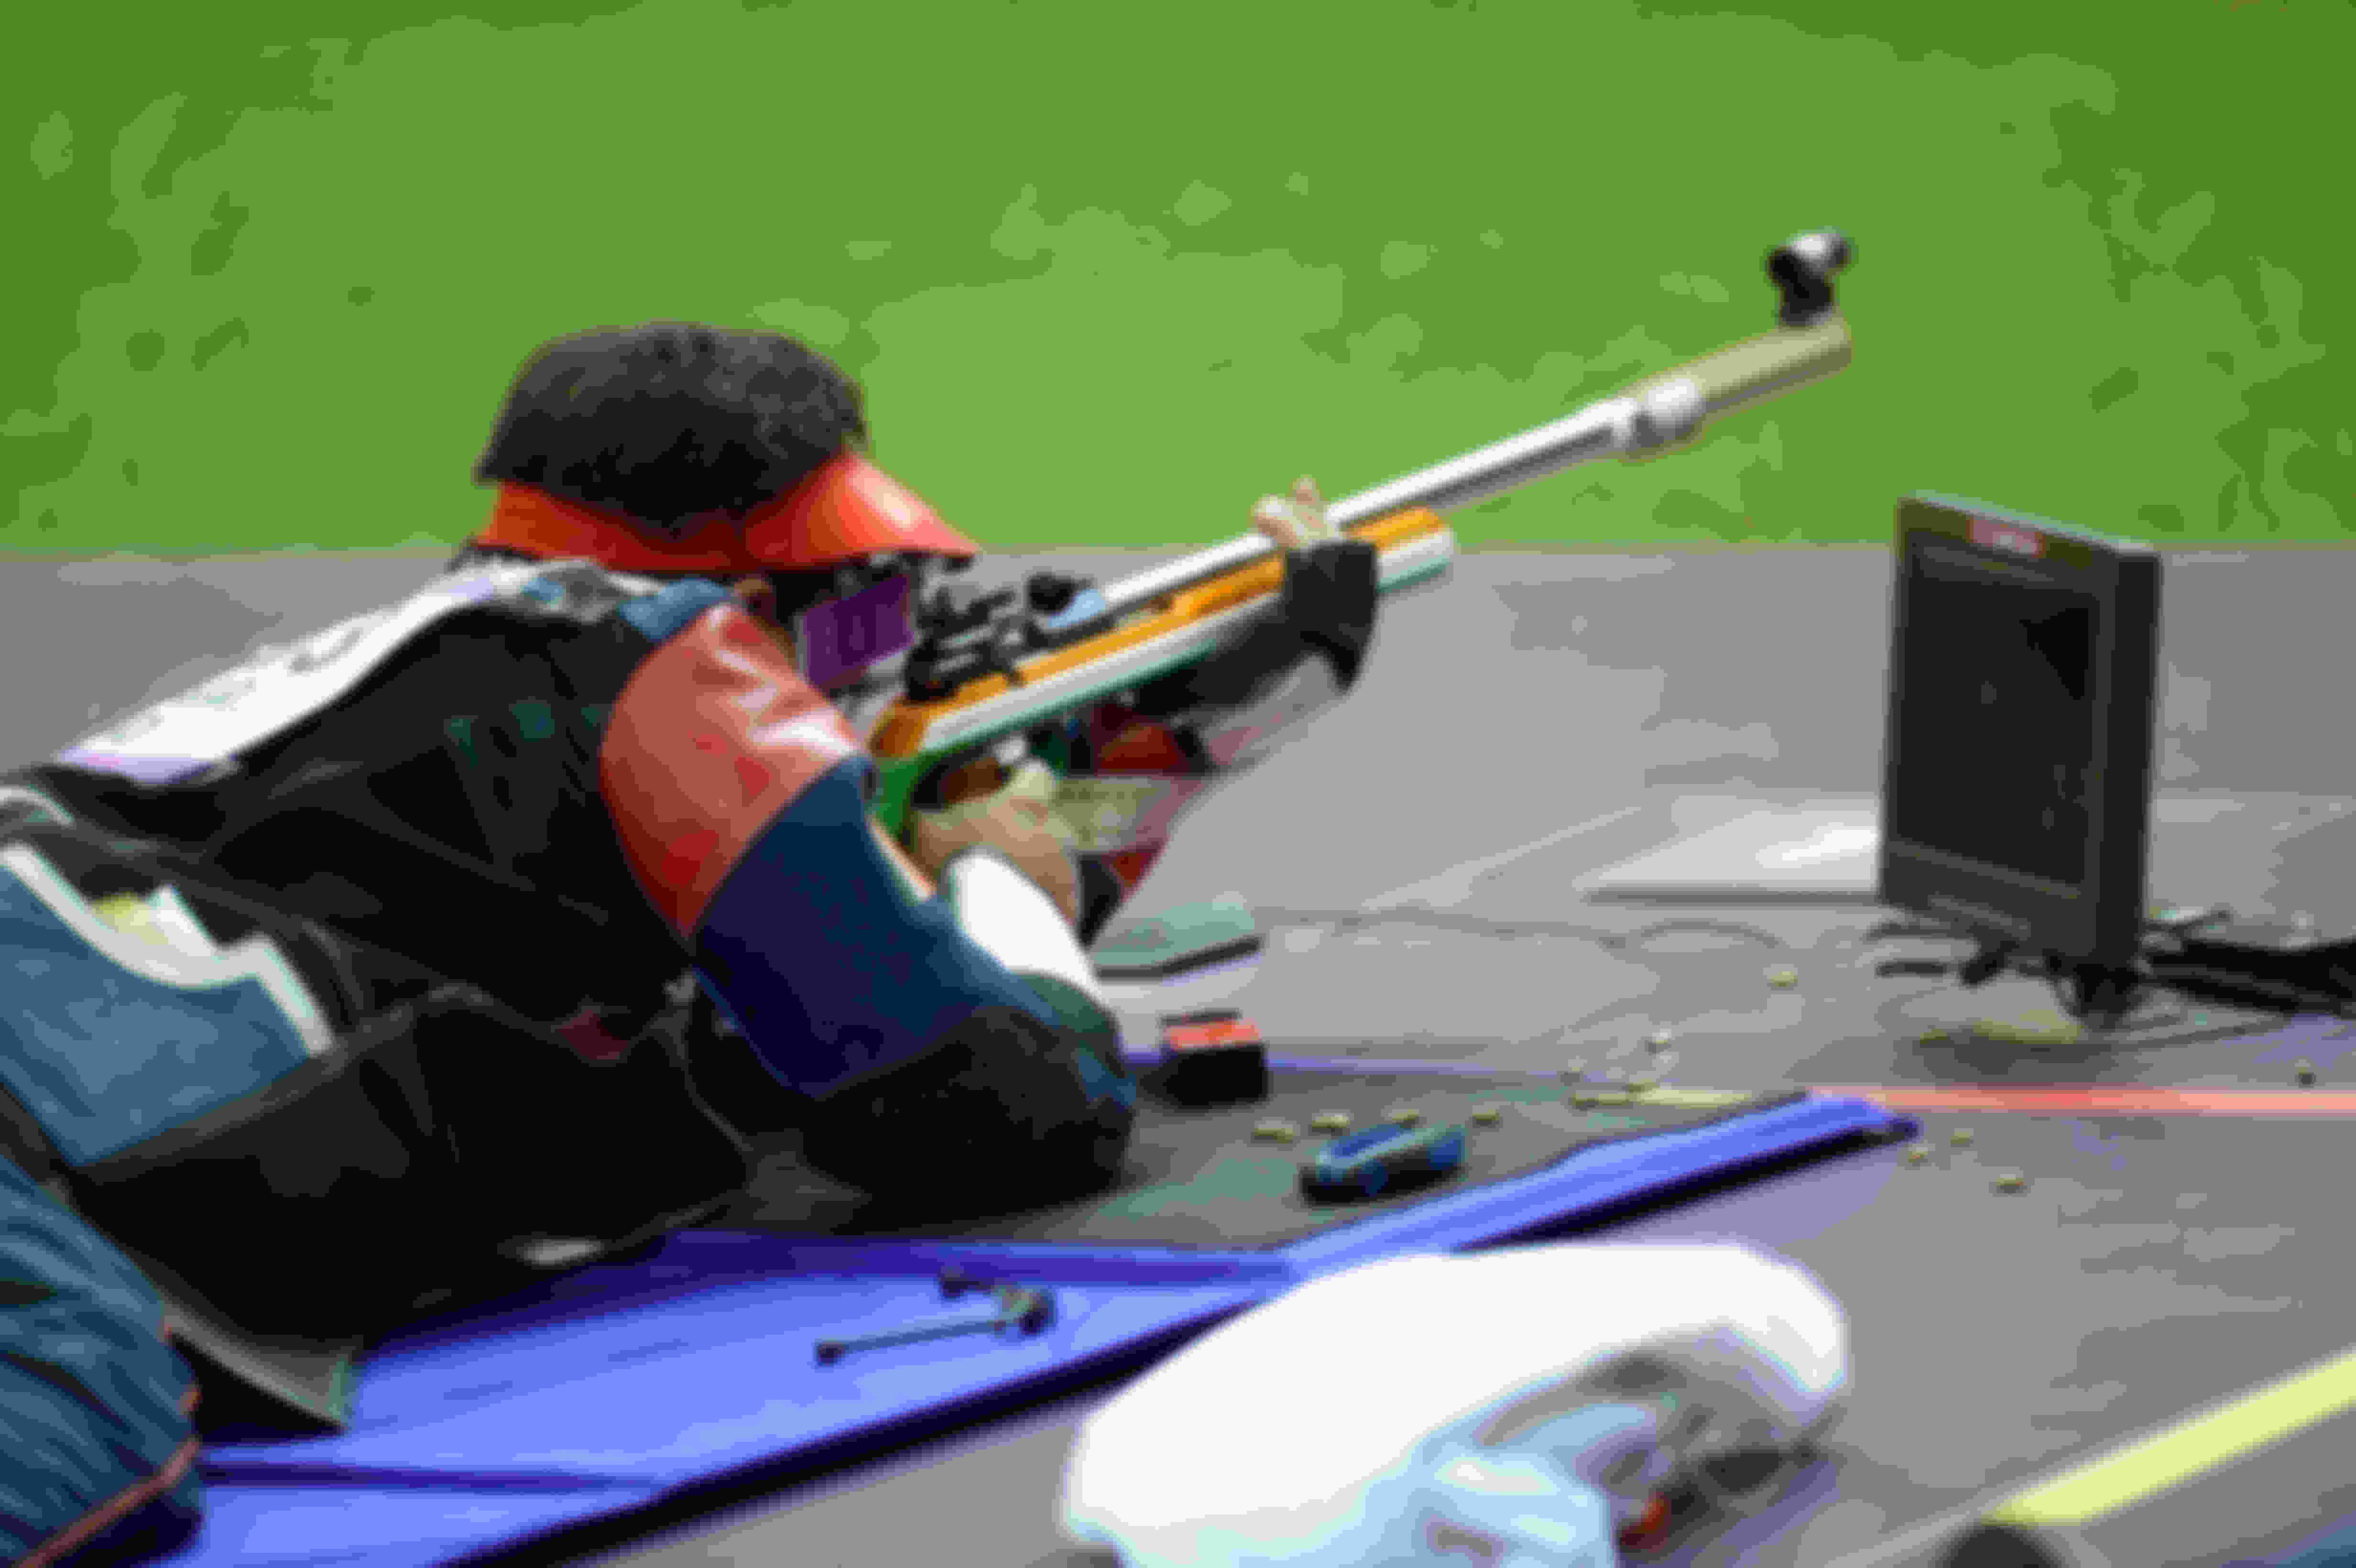 In 50m Rifle 3 Positions, athletes also have to shoot in the prone position.